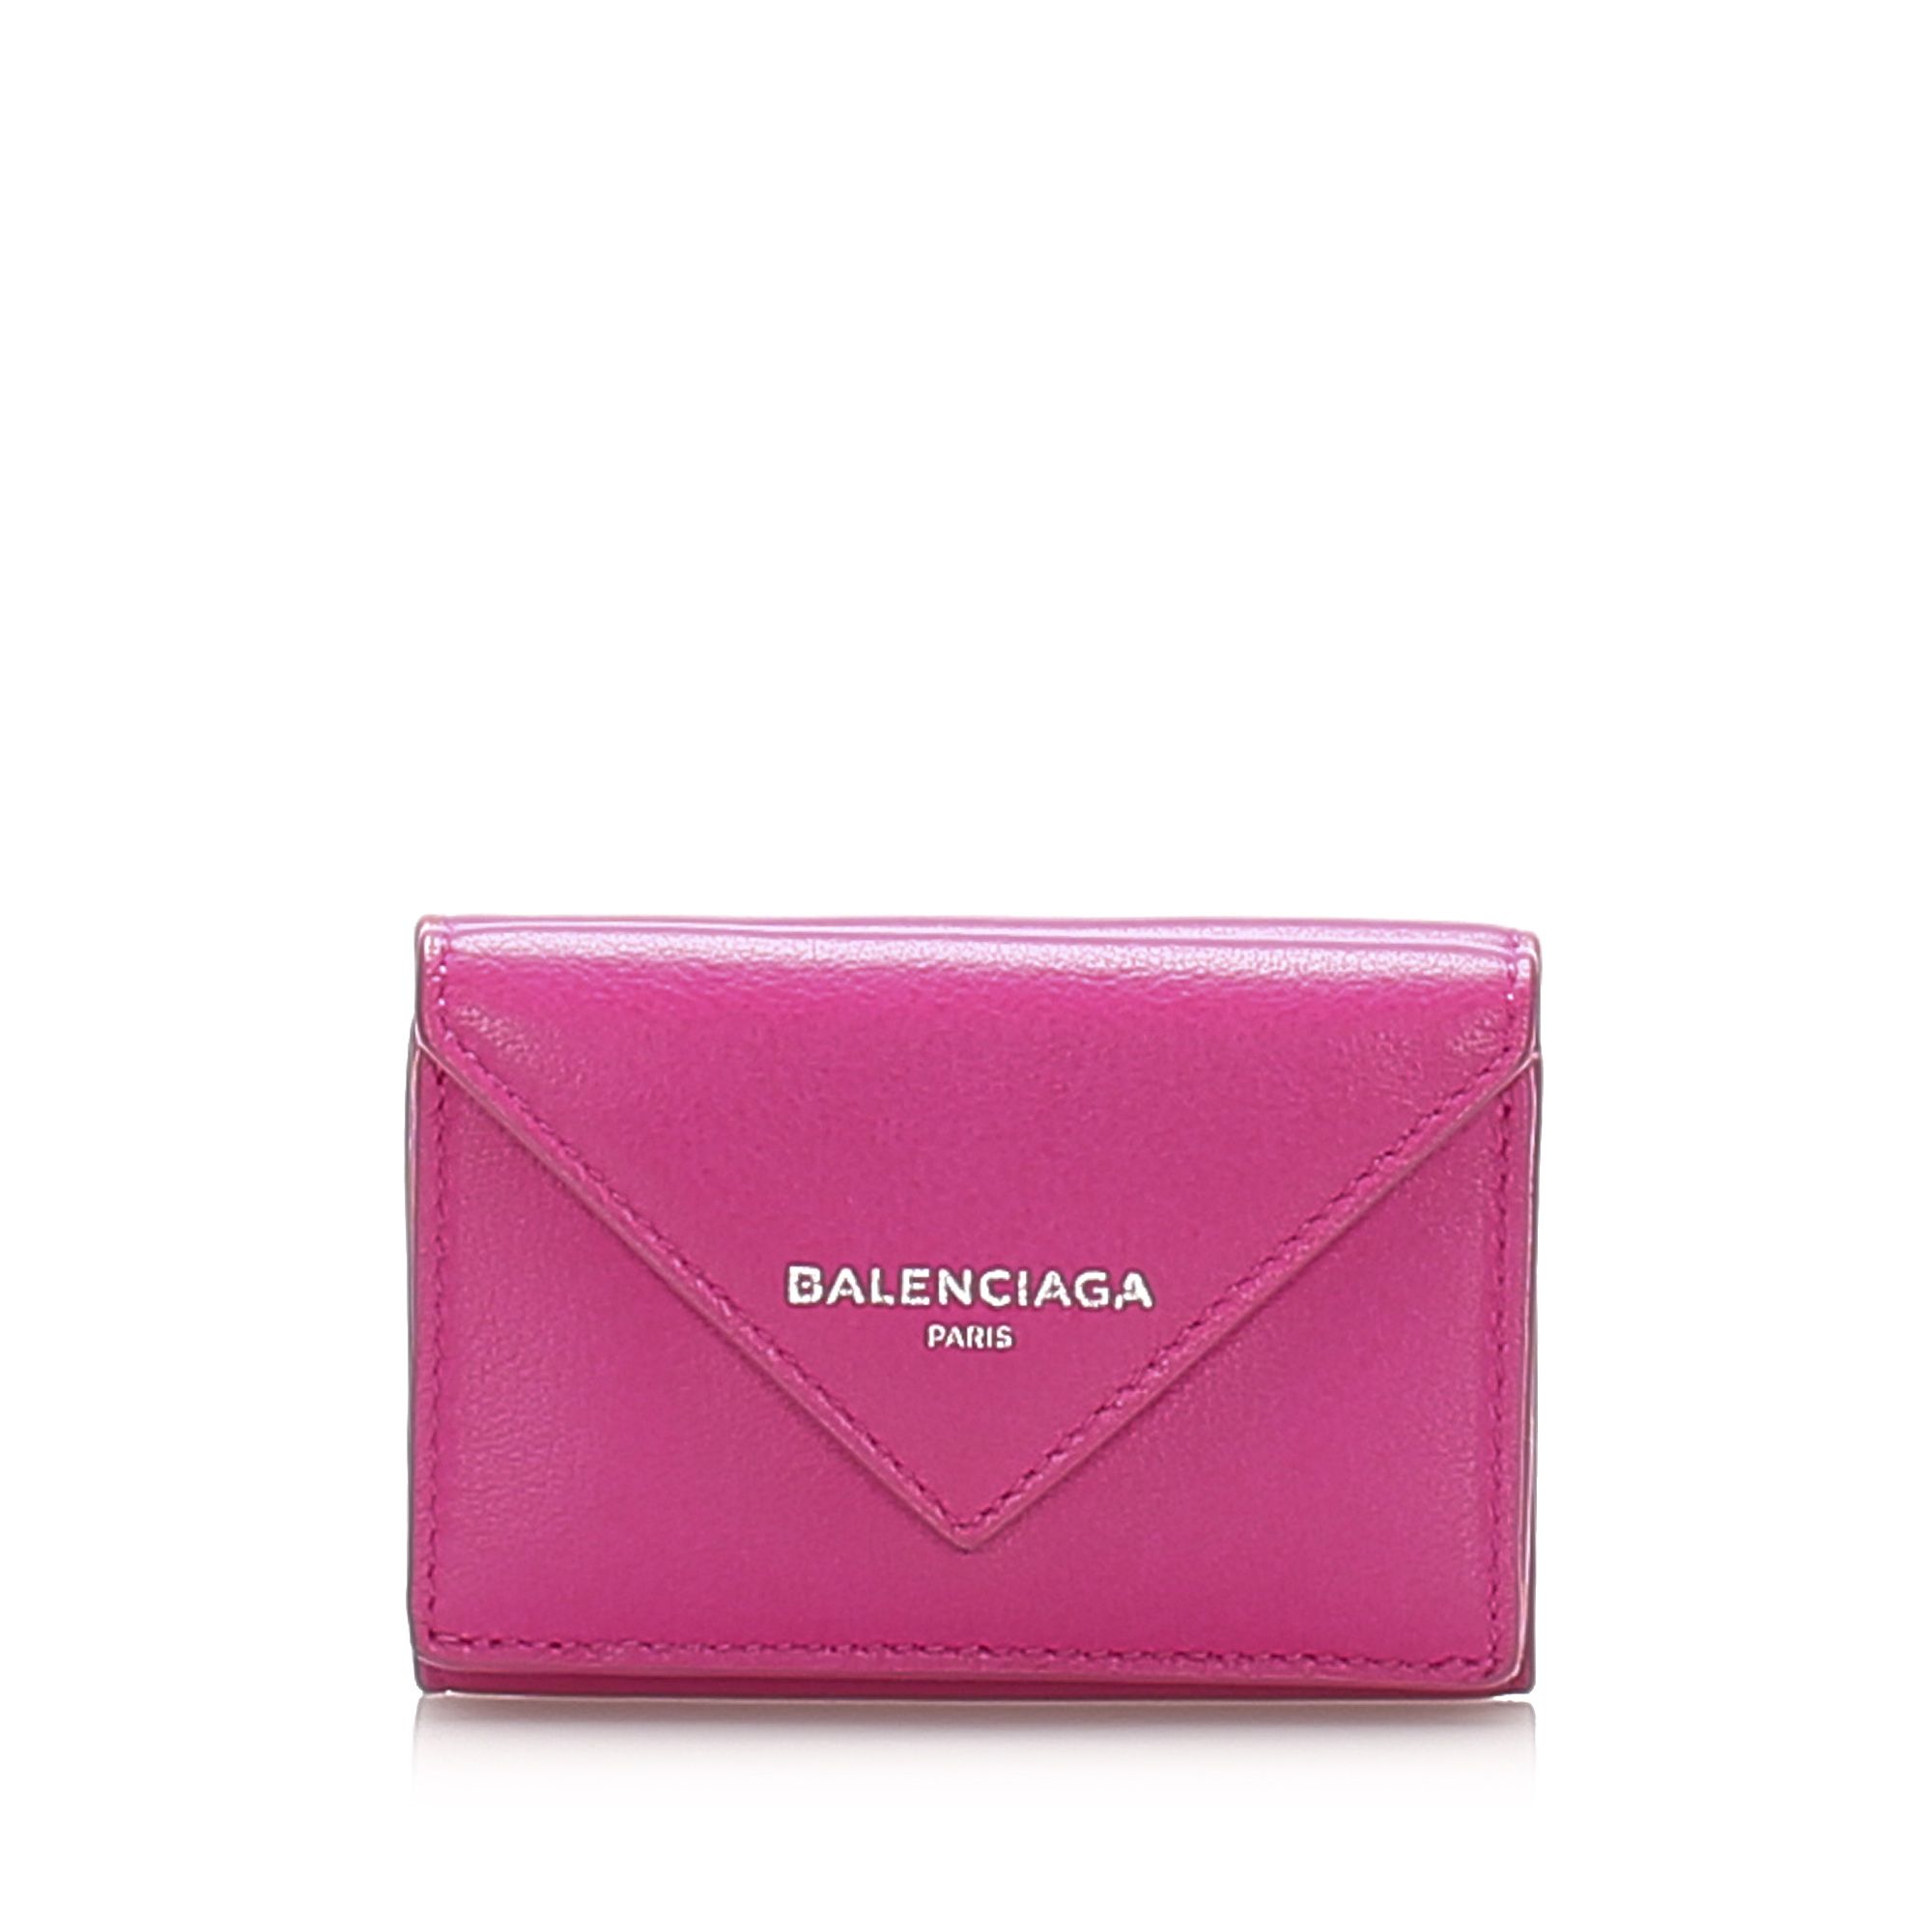 VINTAGE. RRP AS NEW. This wallet features a leather body, a front flap with snap closure, and an interior slip compartment.Exterior back is discolored. Exterior front is discolored.

Dimensions:
Length 7cm
Width 9.5cm
Depth 1cm

Original Accessories: Dust Bag

Color: Pink
Material: Leather x Calf
Country of Origin: Spain
Boutique Reference: SSU92458K1342


Product Rating: VeryGoodCondition